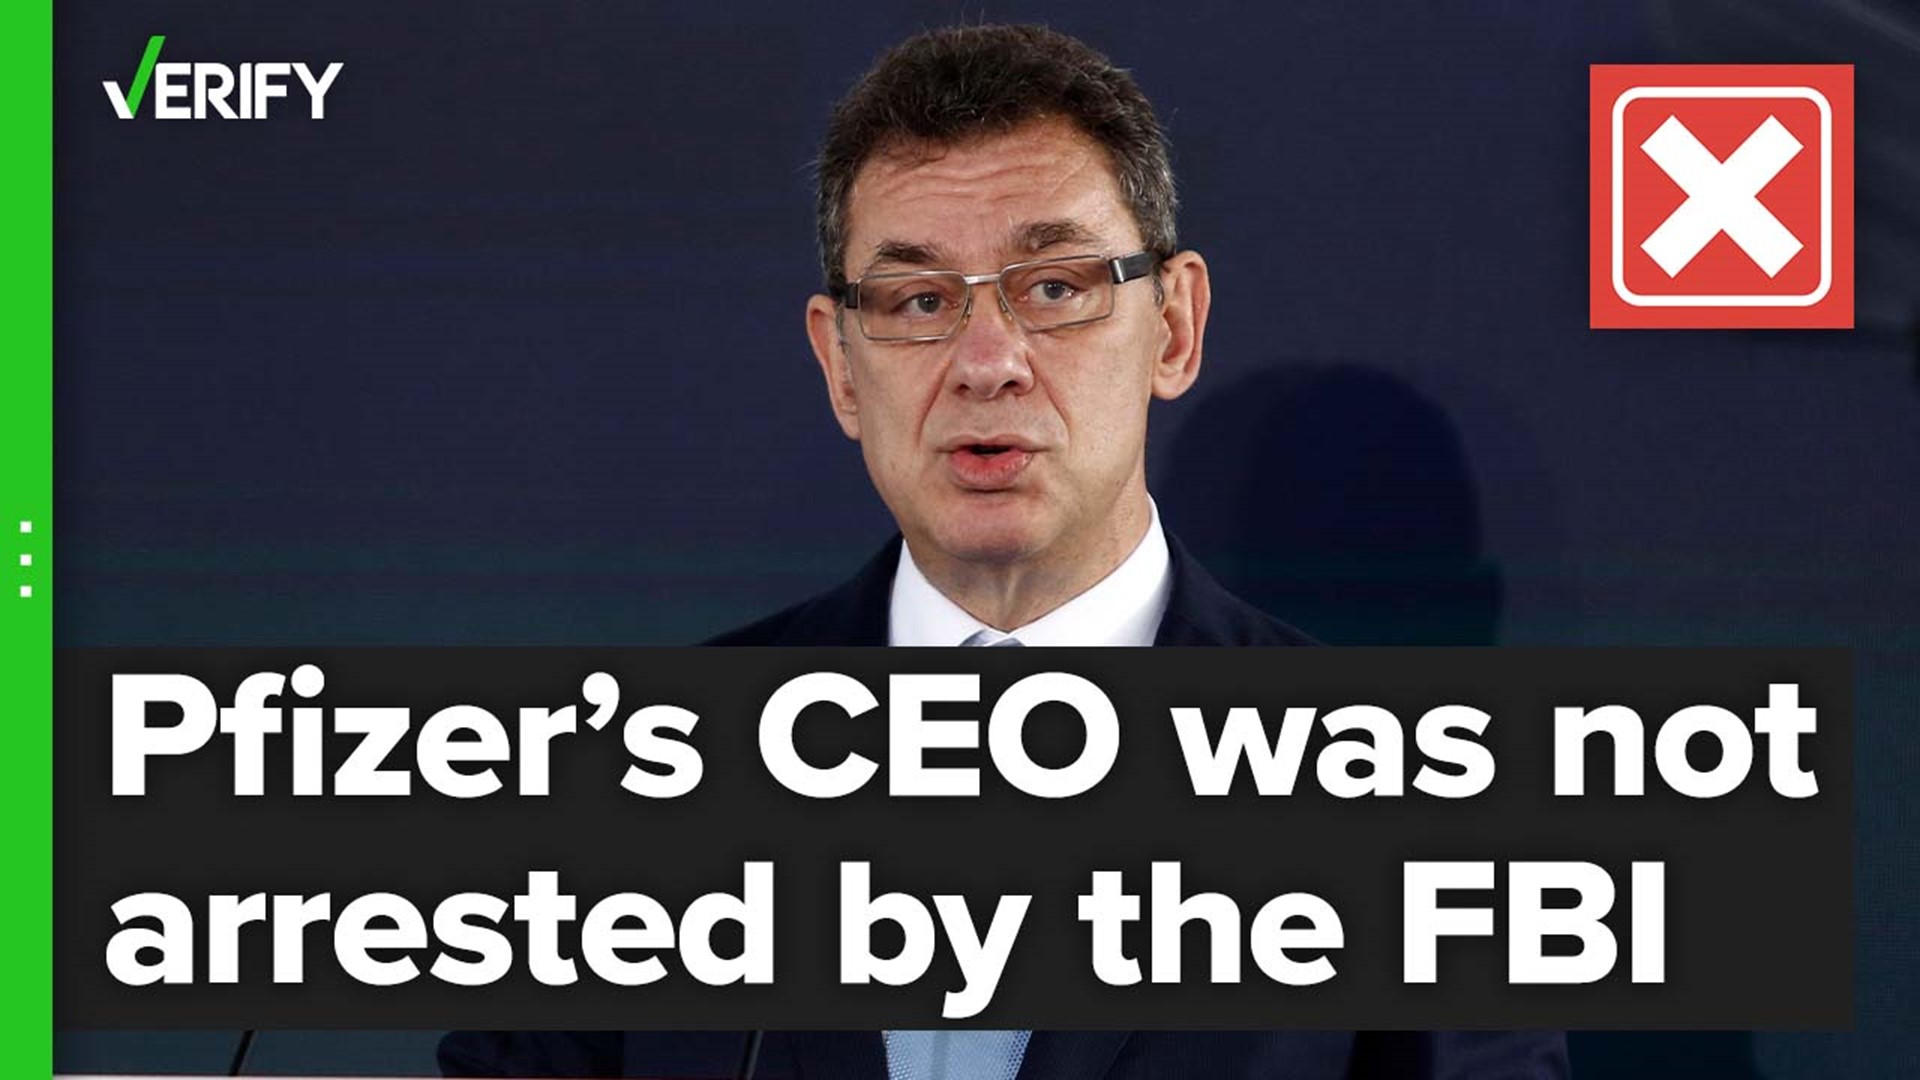 Pfizer’s CEO was not arrested by the FBI for fraud